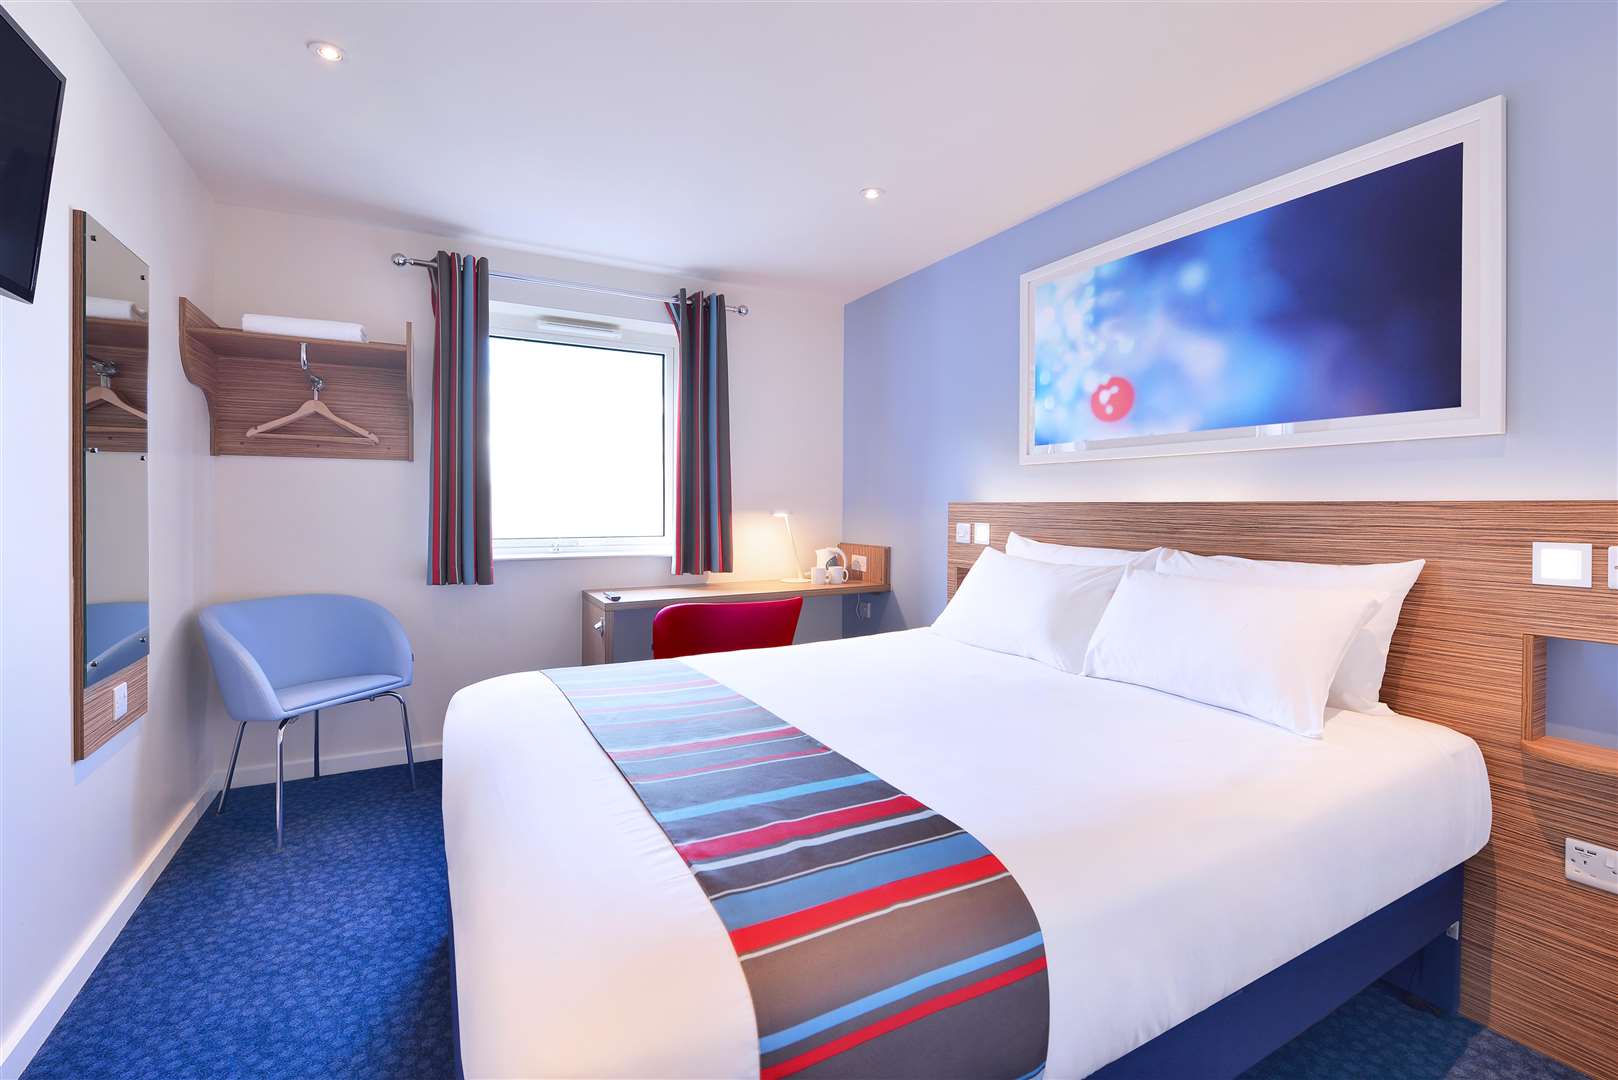 Travelodge has previously outlined plans for a host of new Kent hotels